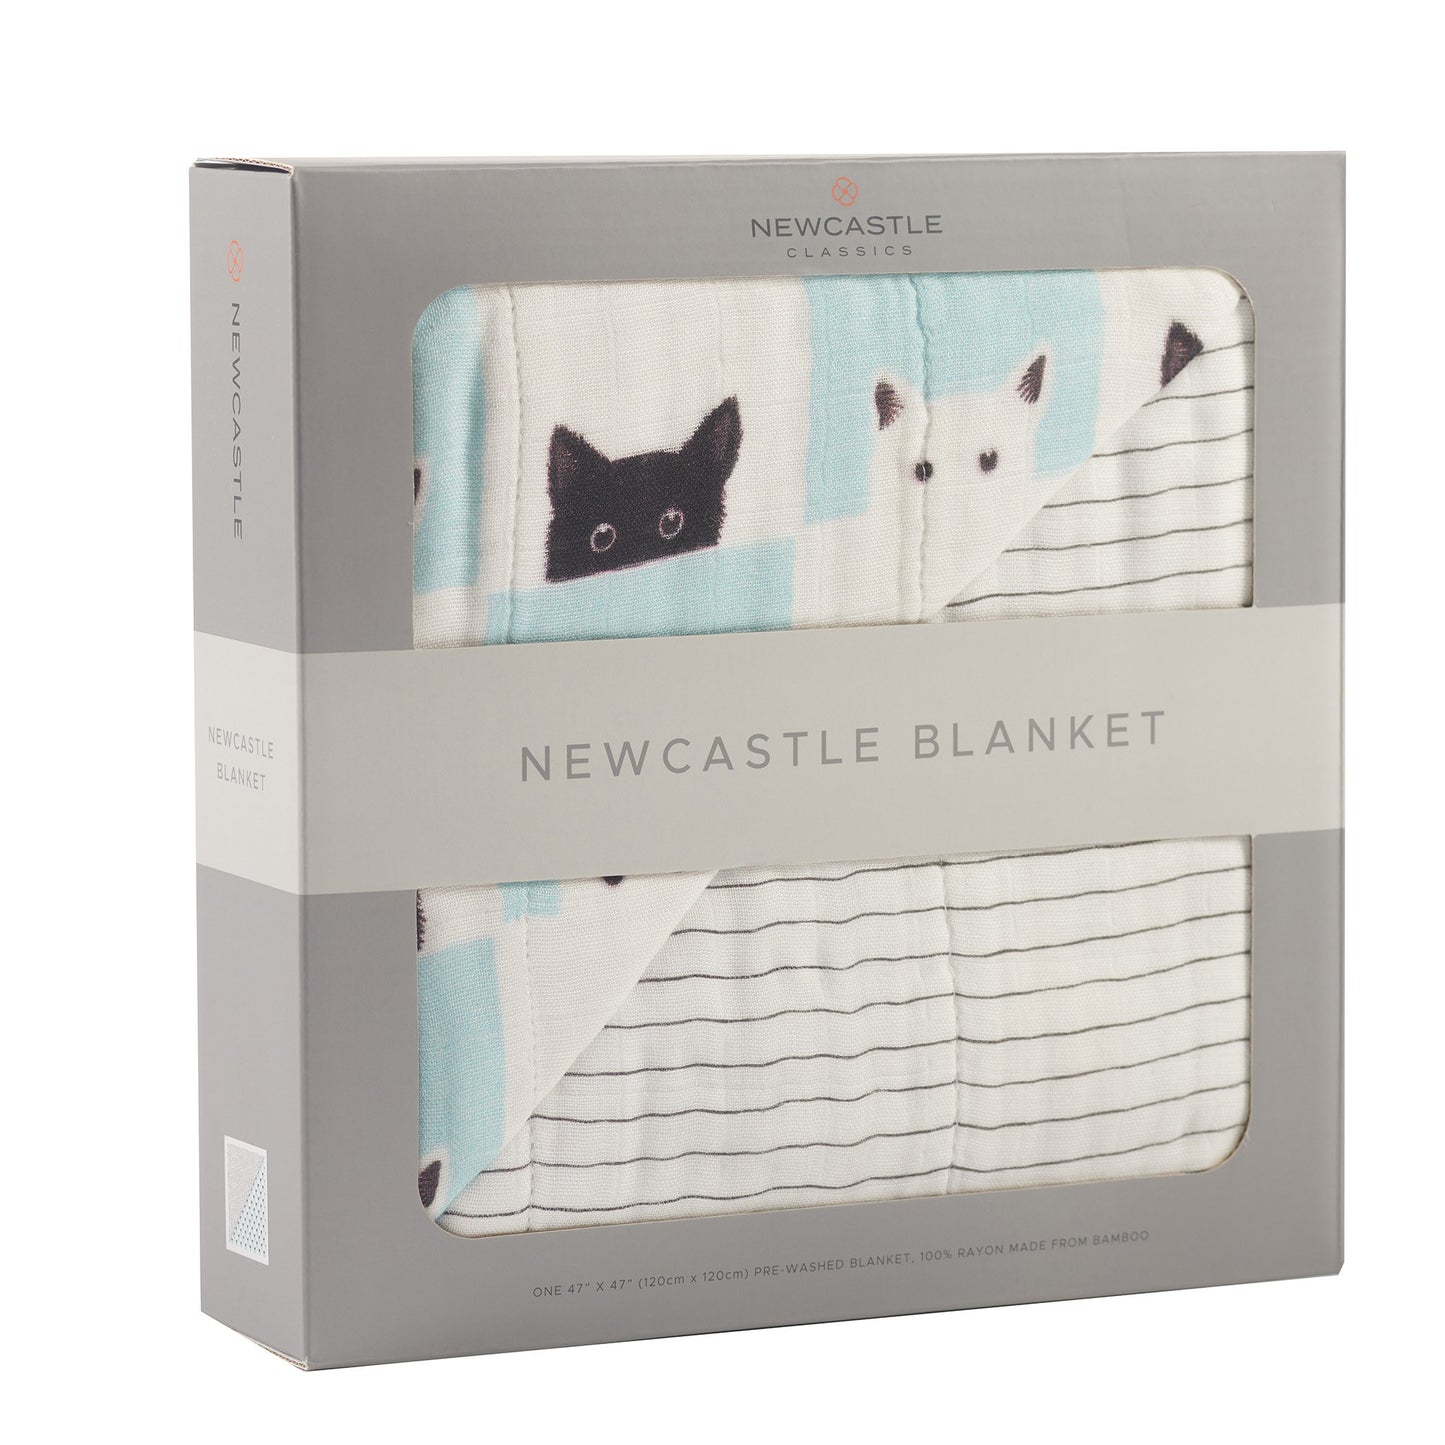 Peek-A-Boo Cats and Pencil Stripe Blanket